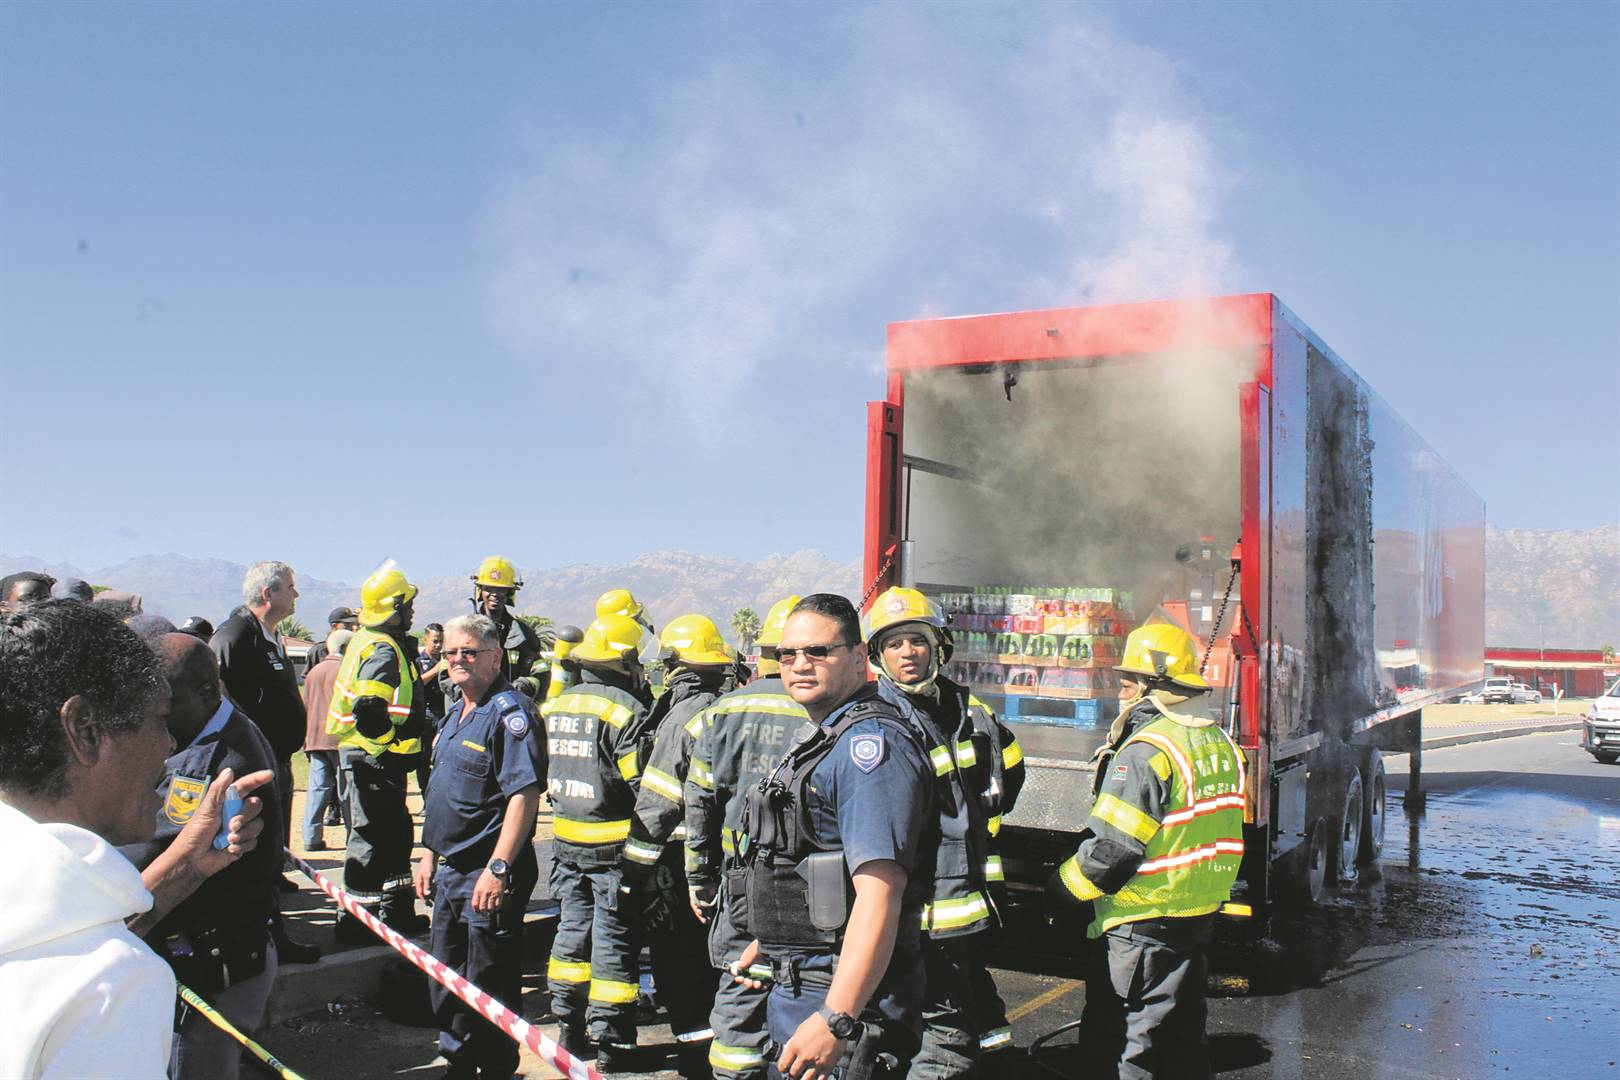 Firefighters on the scene hosing down the Coca-Cola truck and trailer that erupted in flames in Broadway Boulevard, Strand, on Tuesday (18 April).Photo: Yaseen Gaffar 